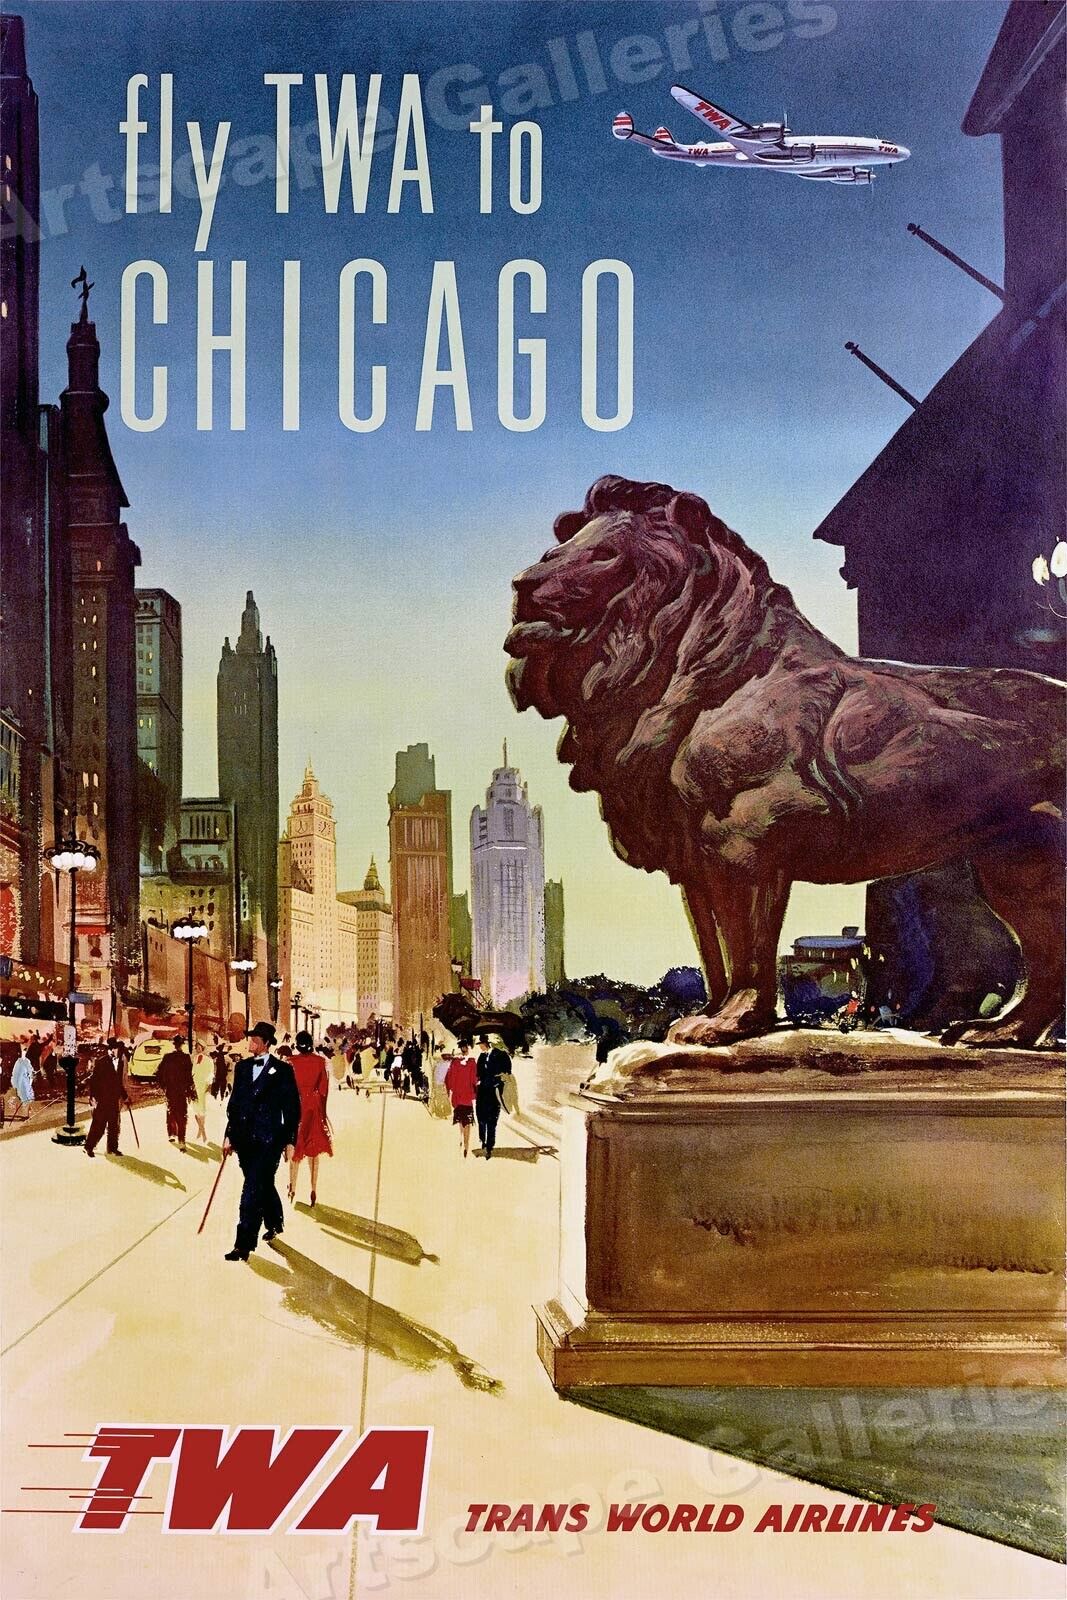 TWA See Chicago Lion 1960s Vintage Style Air Travel Poster - 16x24